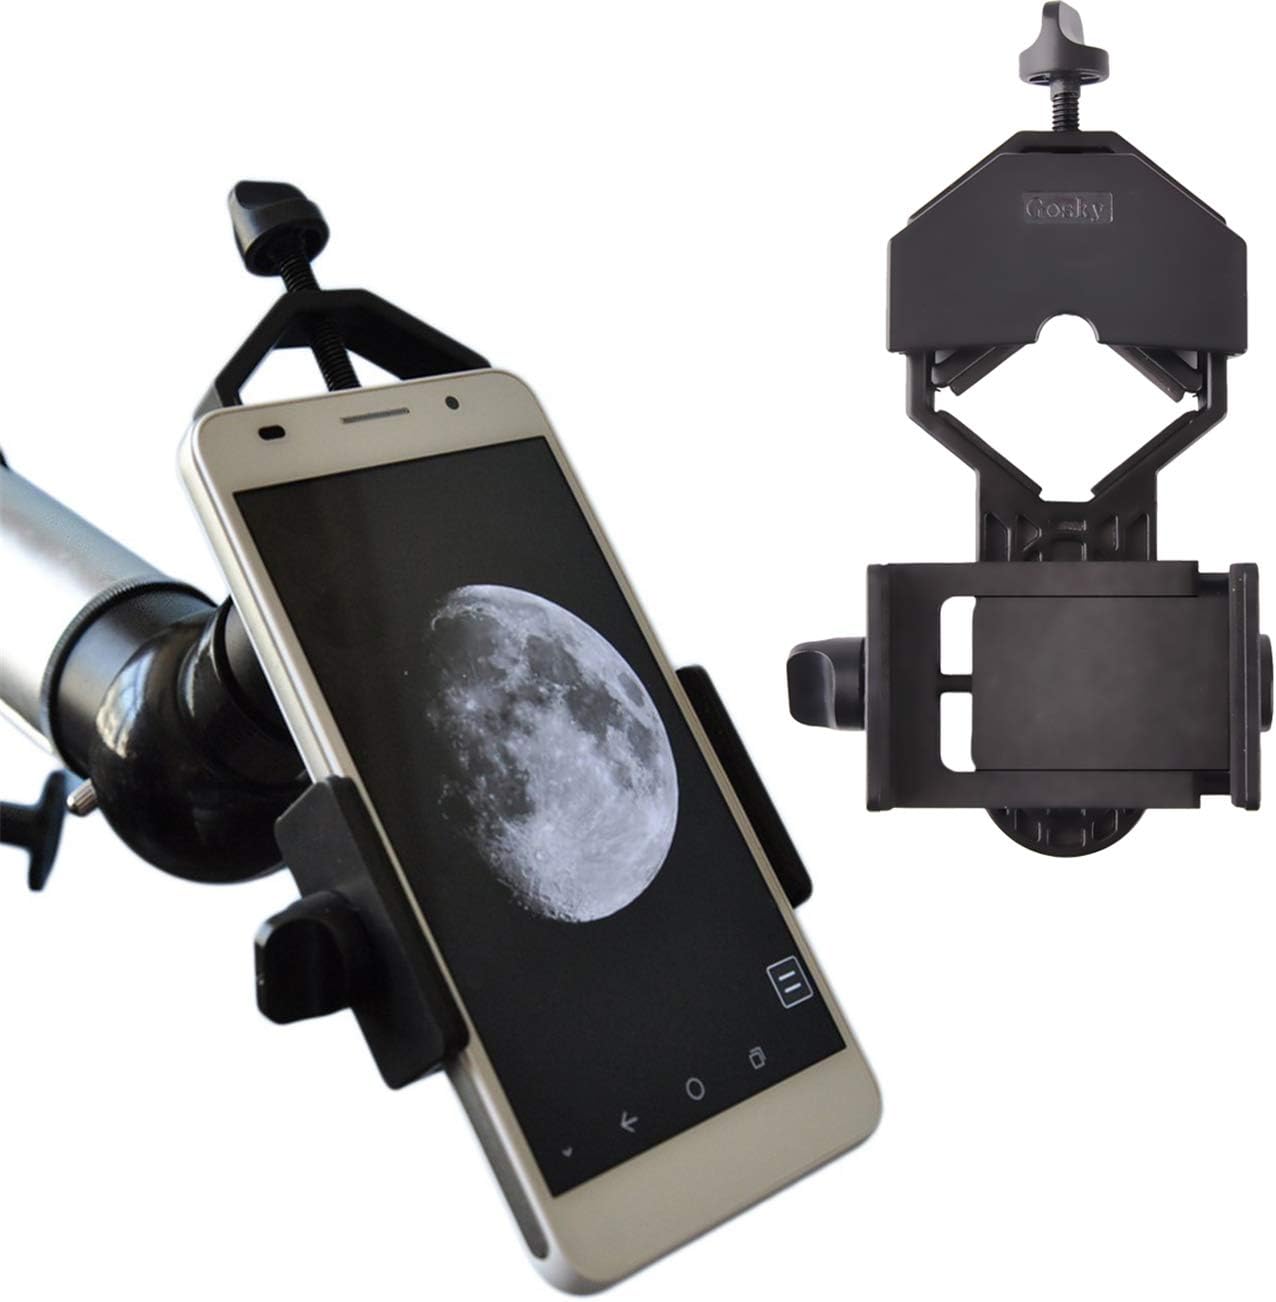 telescope on the market detailed review